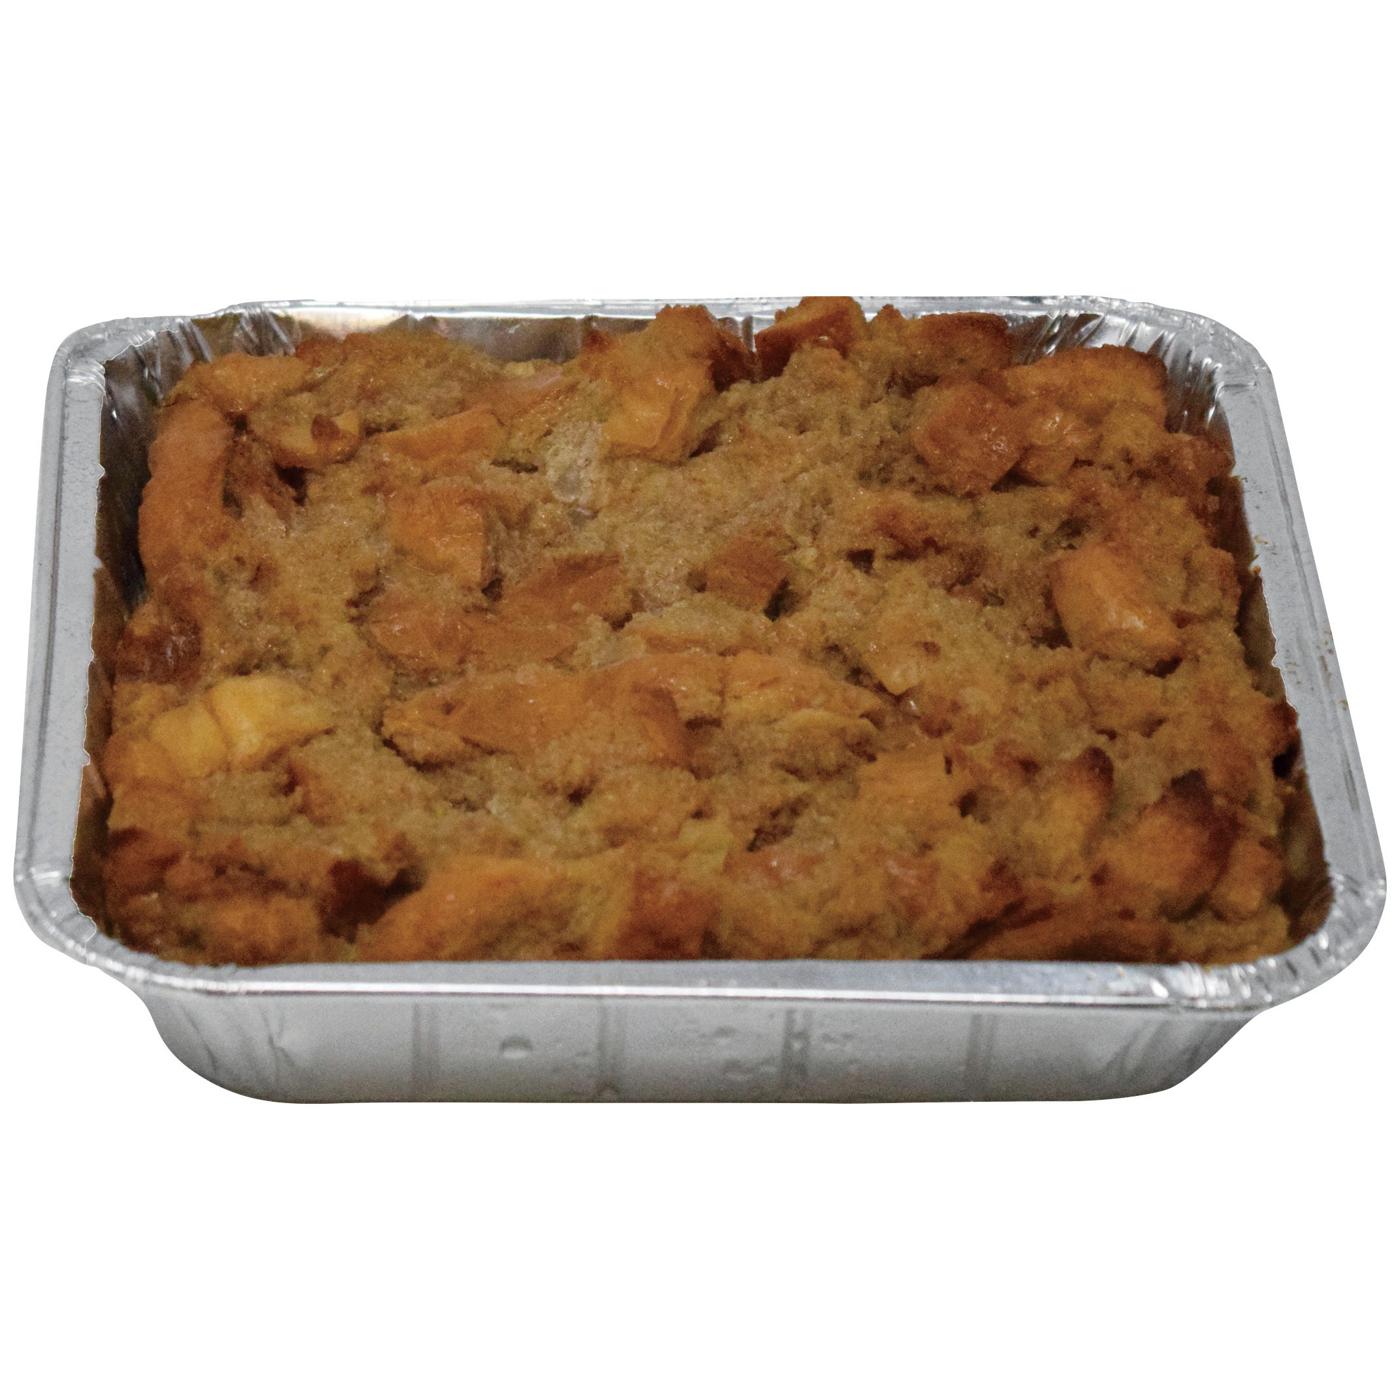 H-E-B Bakery Bread Pudding (Sold Cold); image 1 of 2